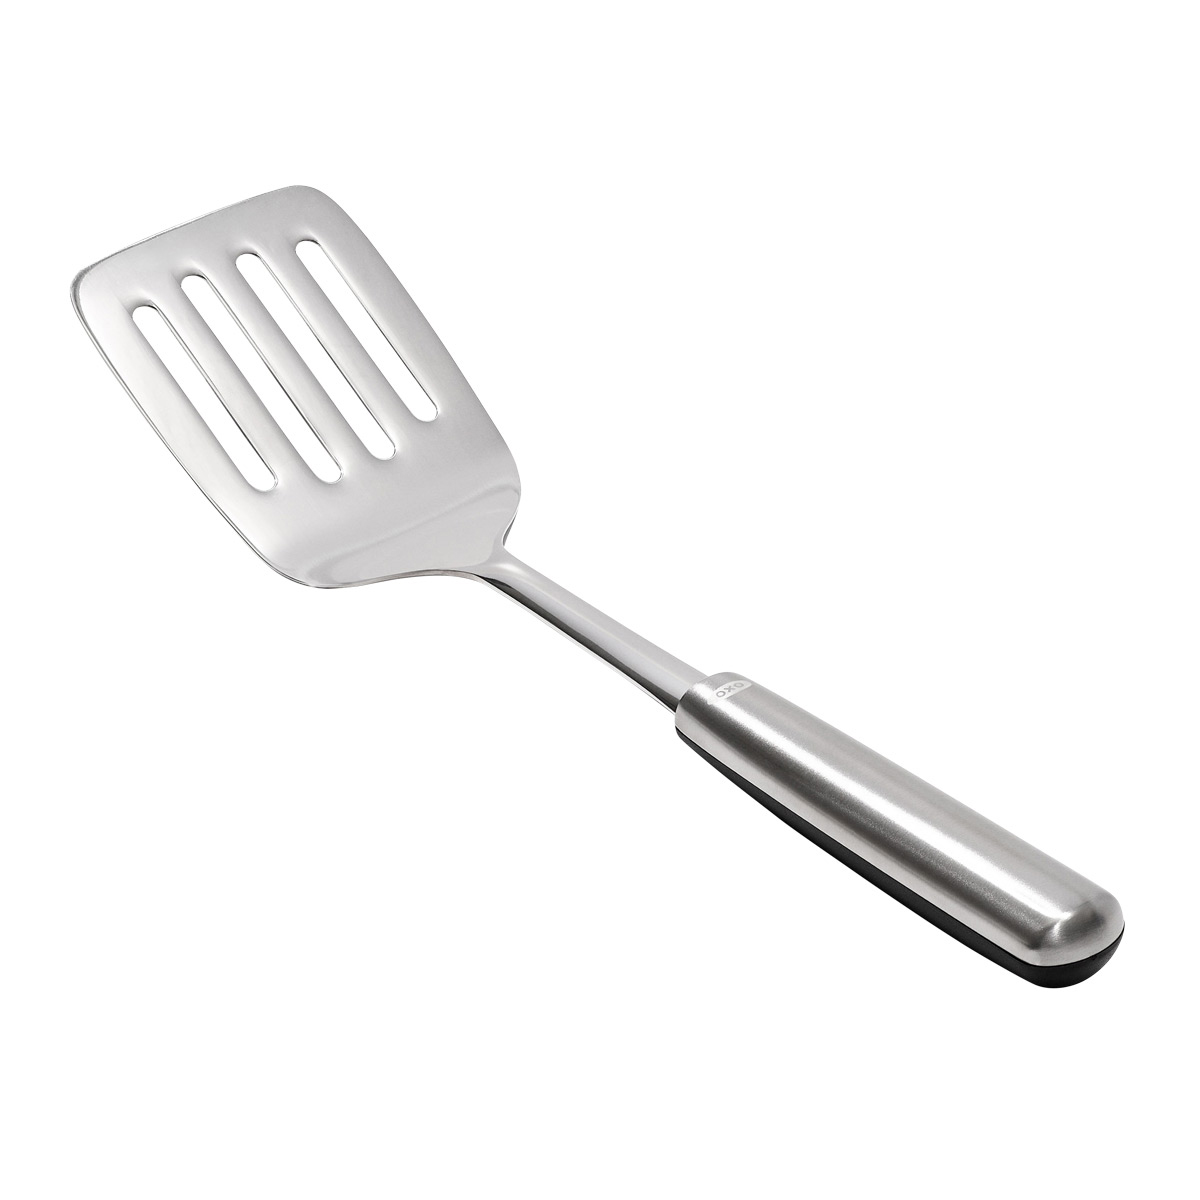 https://www.containerstore.com/catalogimages/464349/10089983-oxo-gg-steel-cooking-turner.jpg